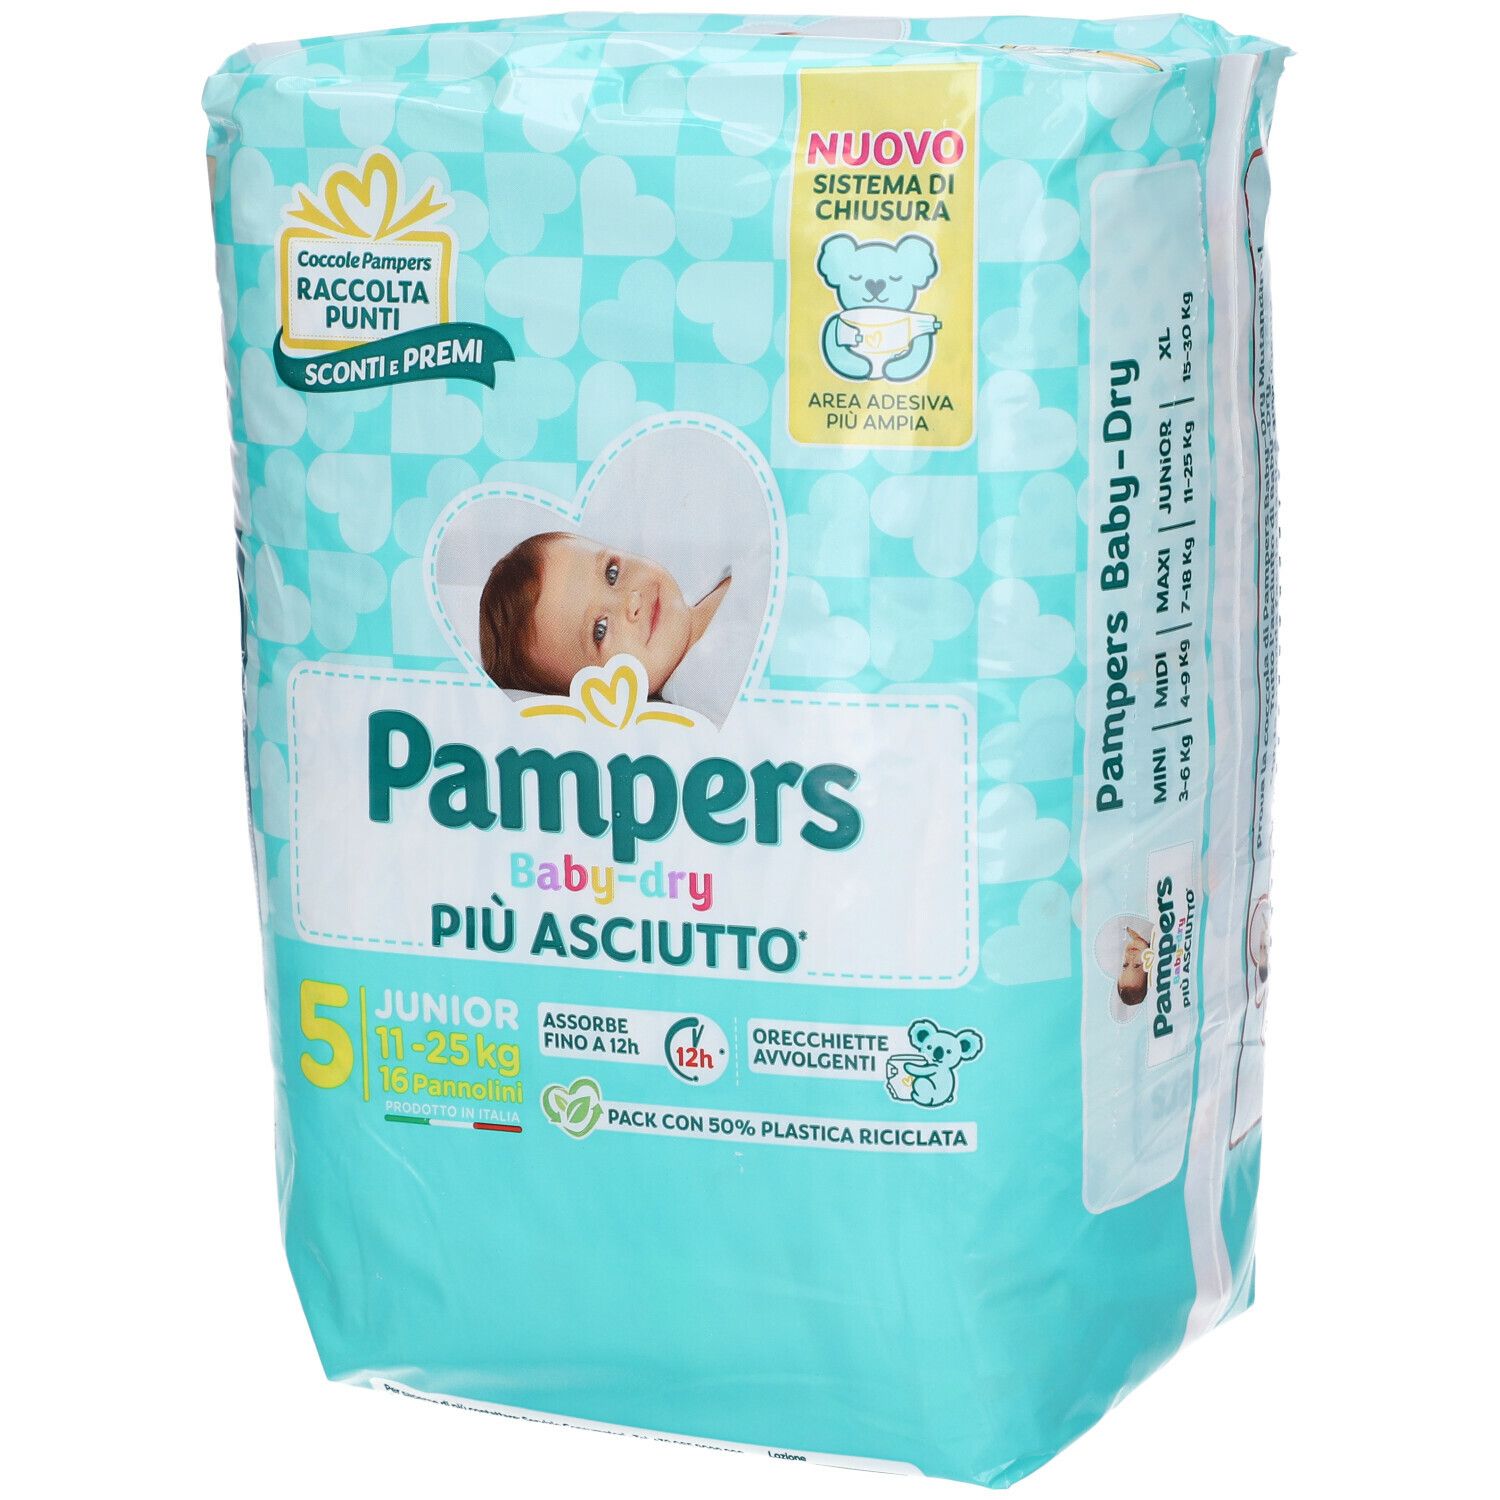 Image of Pampers Baby Dry 11/25 kg